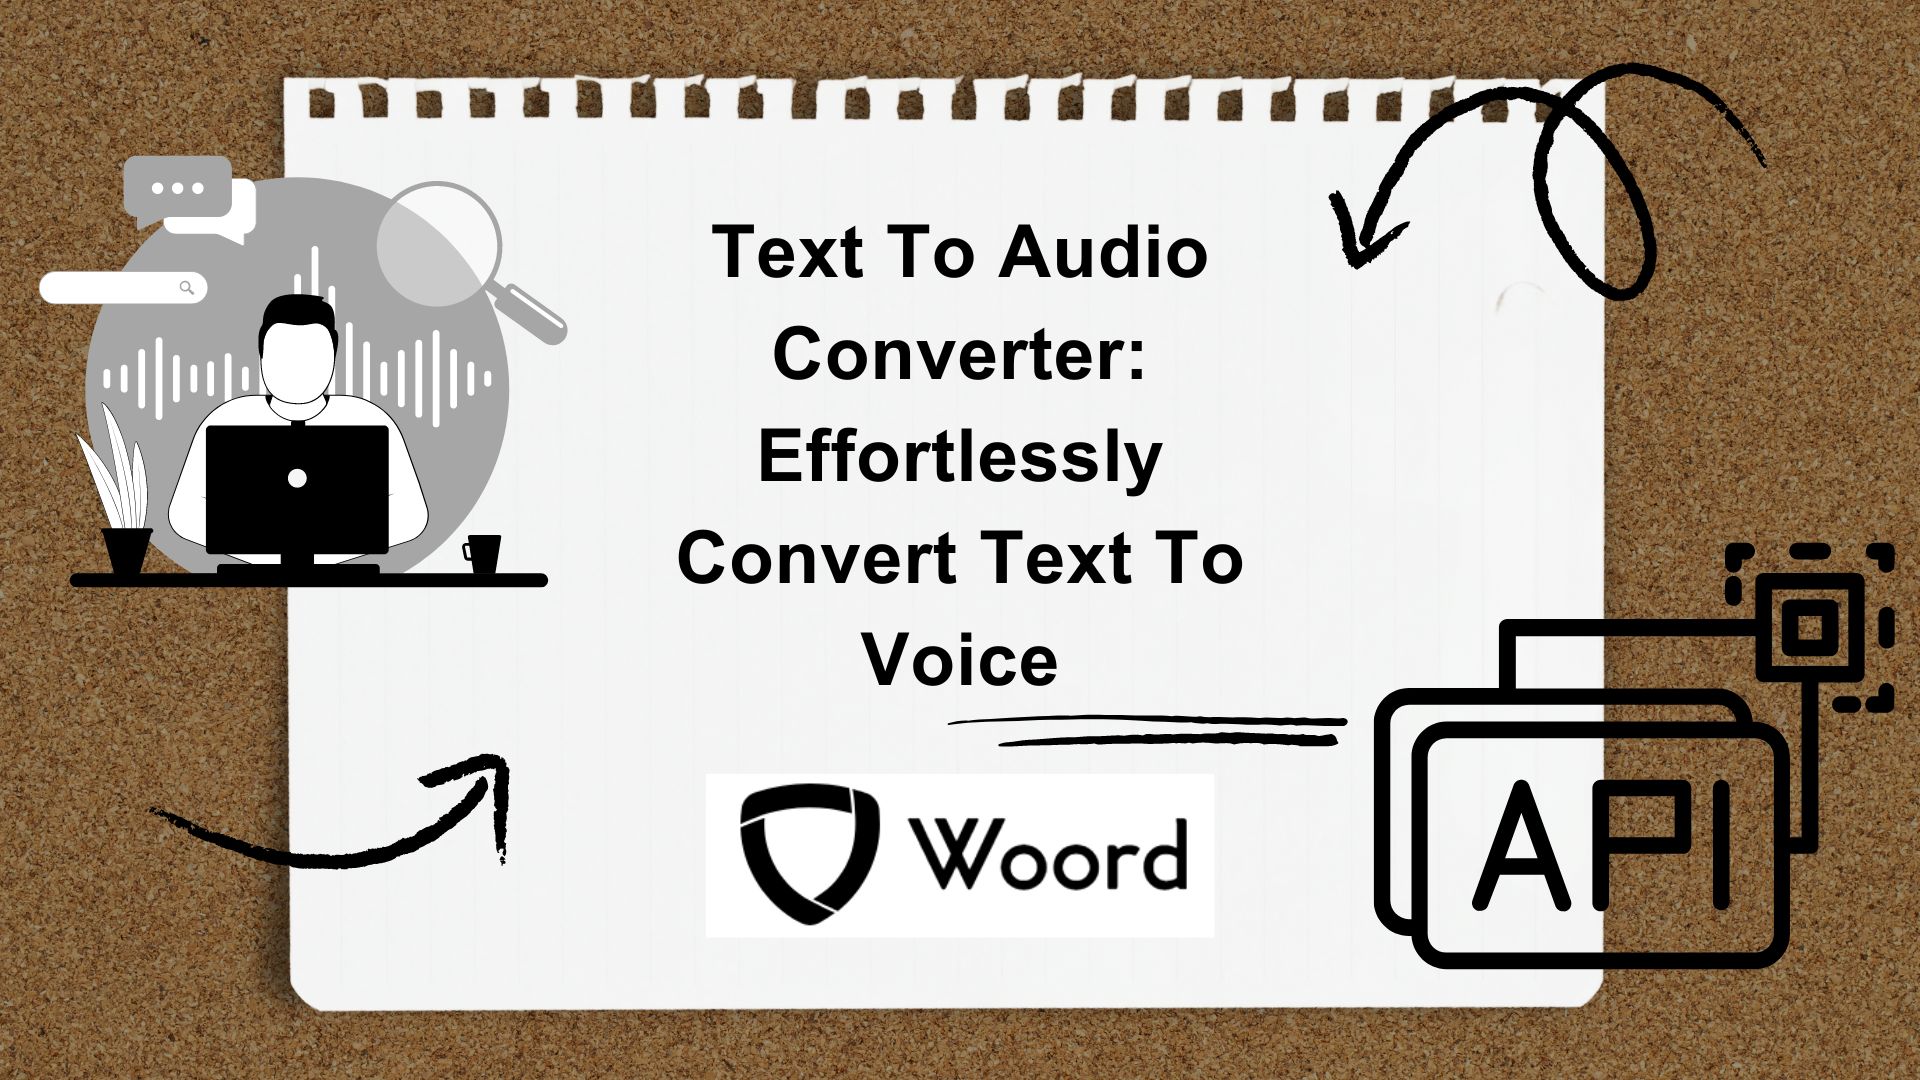 Text To Audio Converter: Effortlessly Convert Text To Voice